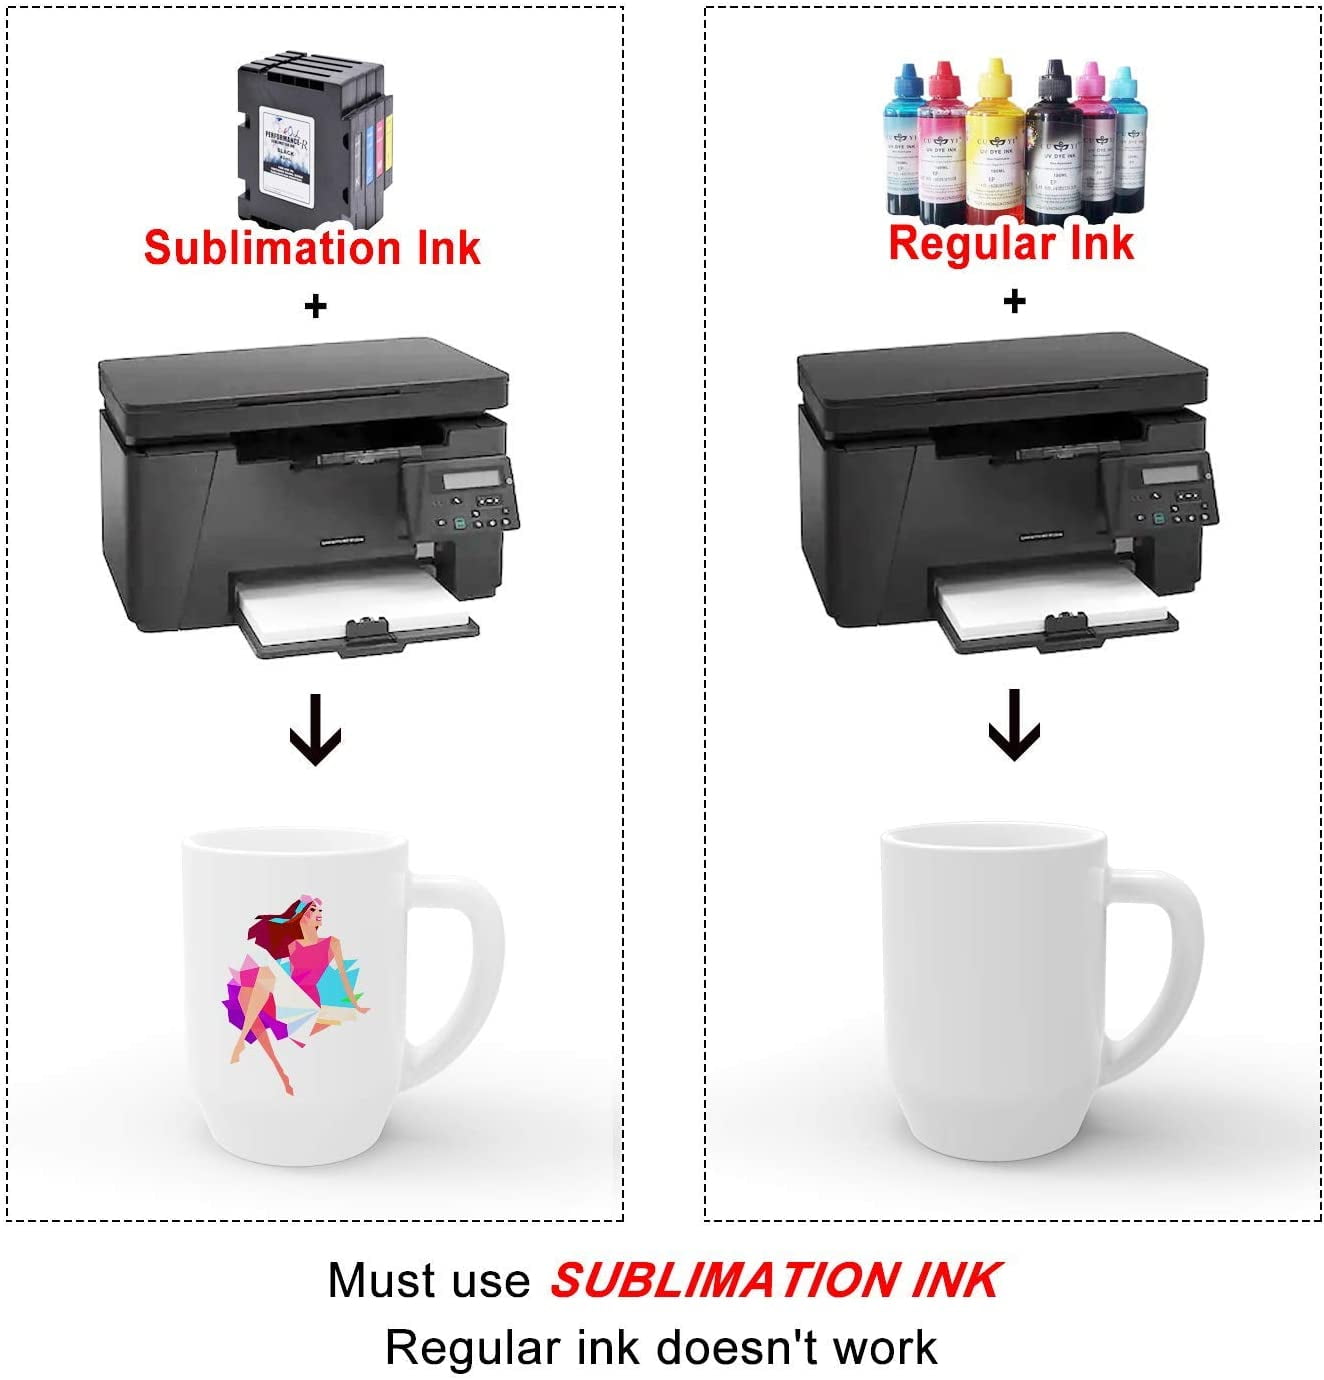 A-sub 150 Sheets Sublimation Heat Transfer Paper 13x19 inch Compatible with Inkjet Printer, Size: 13 x 19